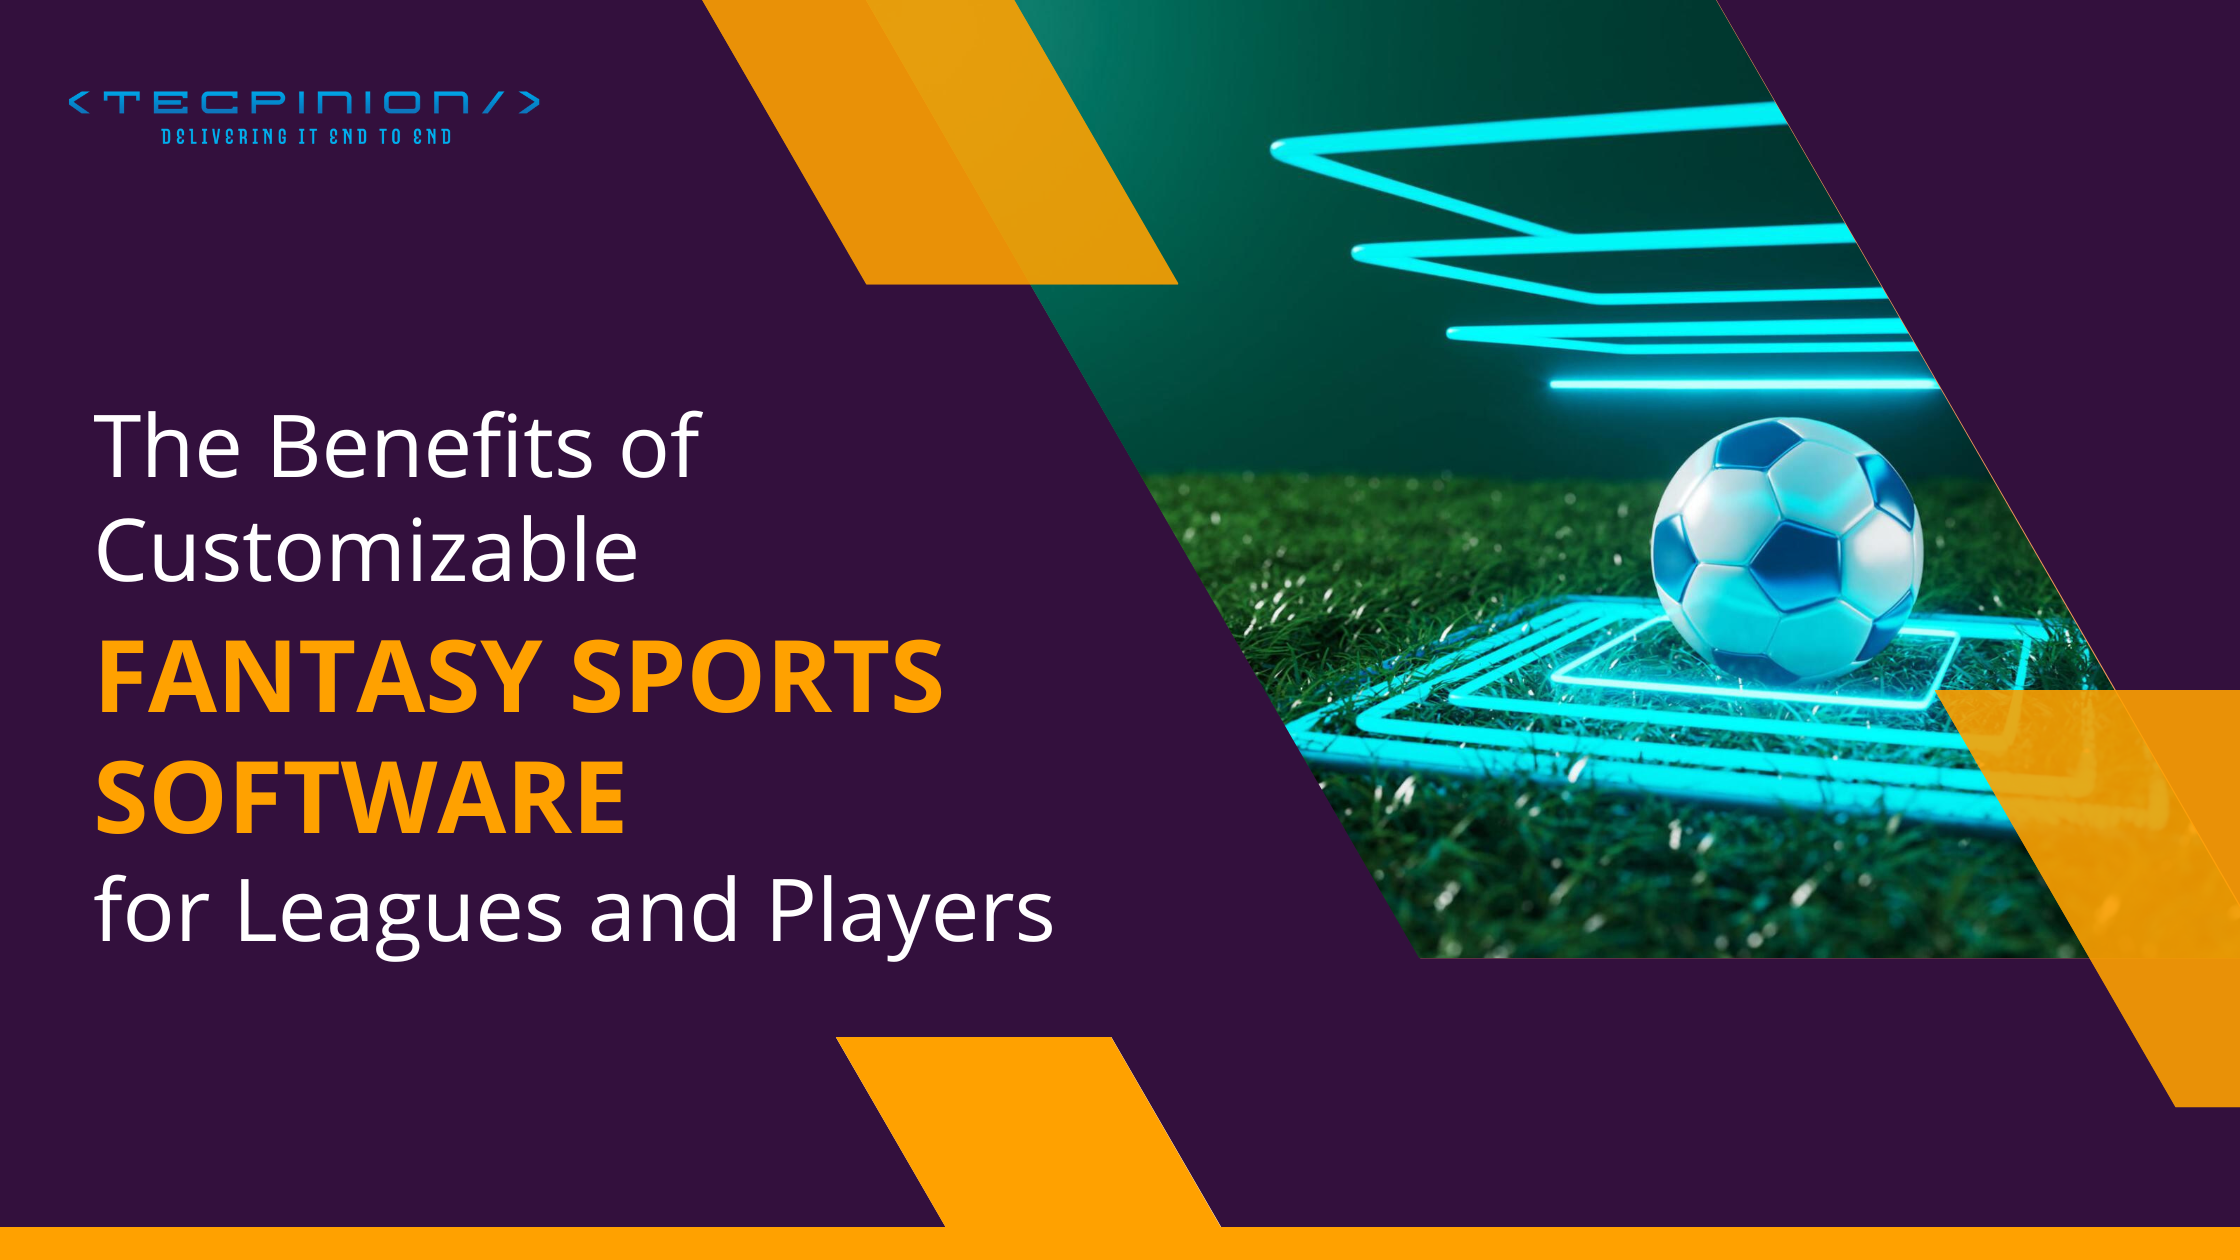 The Benefits of Customizable Fantasy Sports Software for Leagues and Players